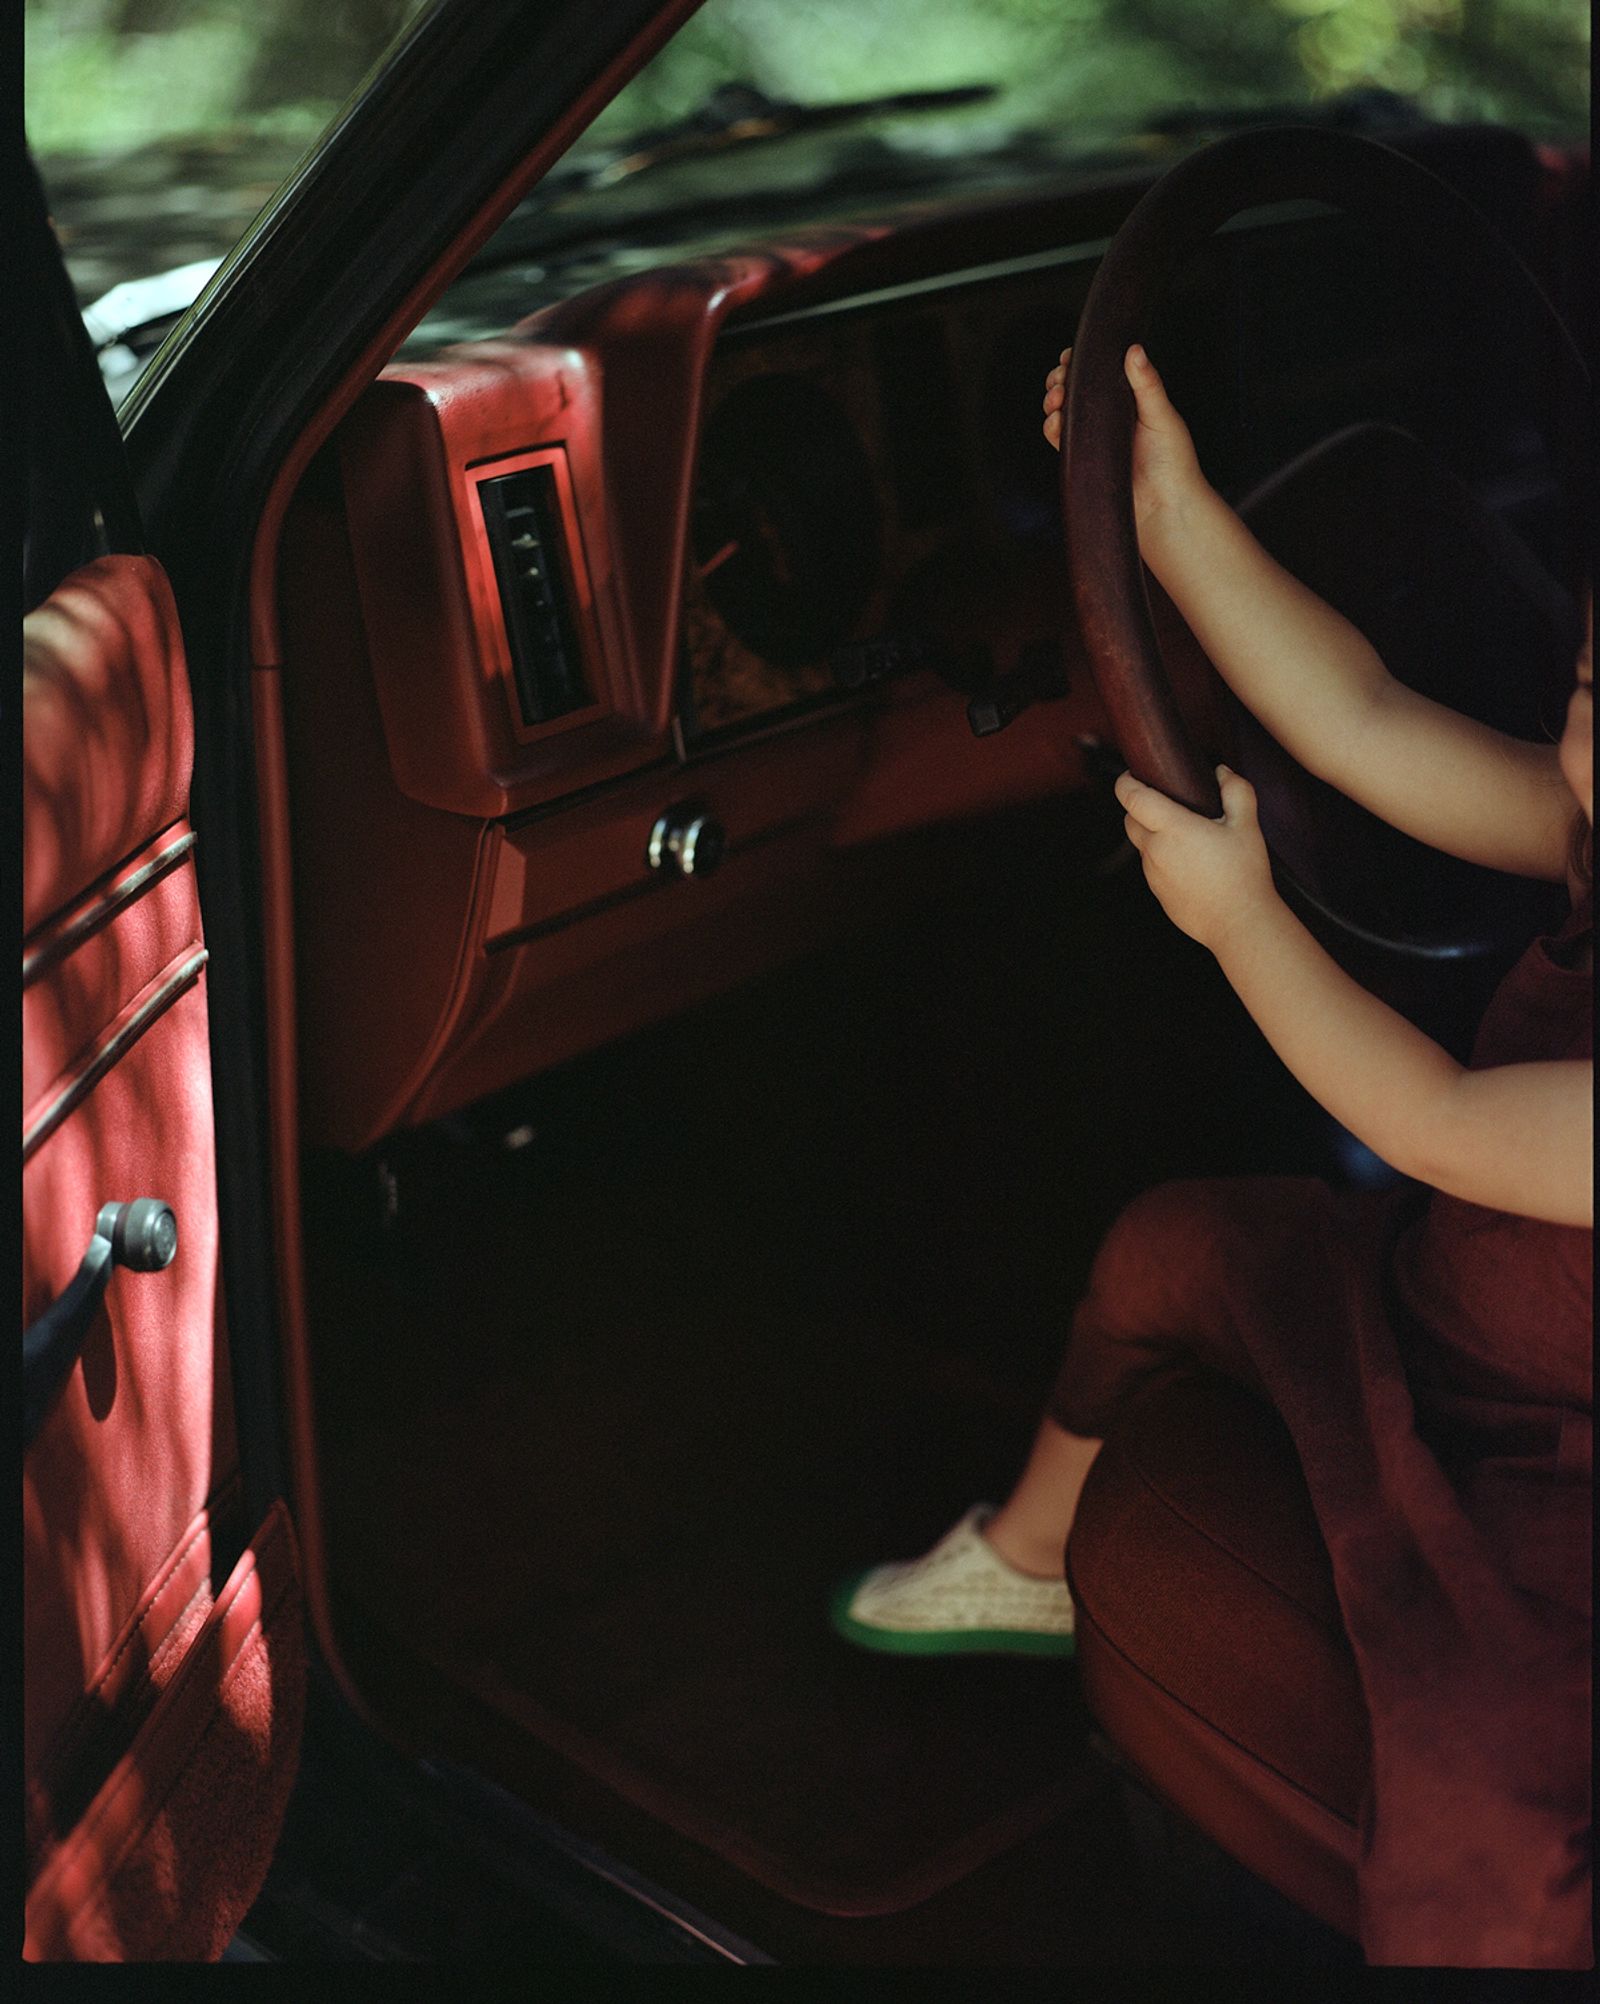 © Madeleine Morlet - Oona And The Red Car (Los Angeles)